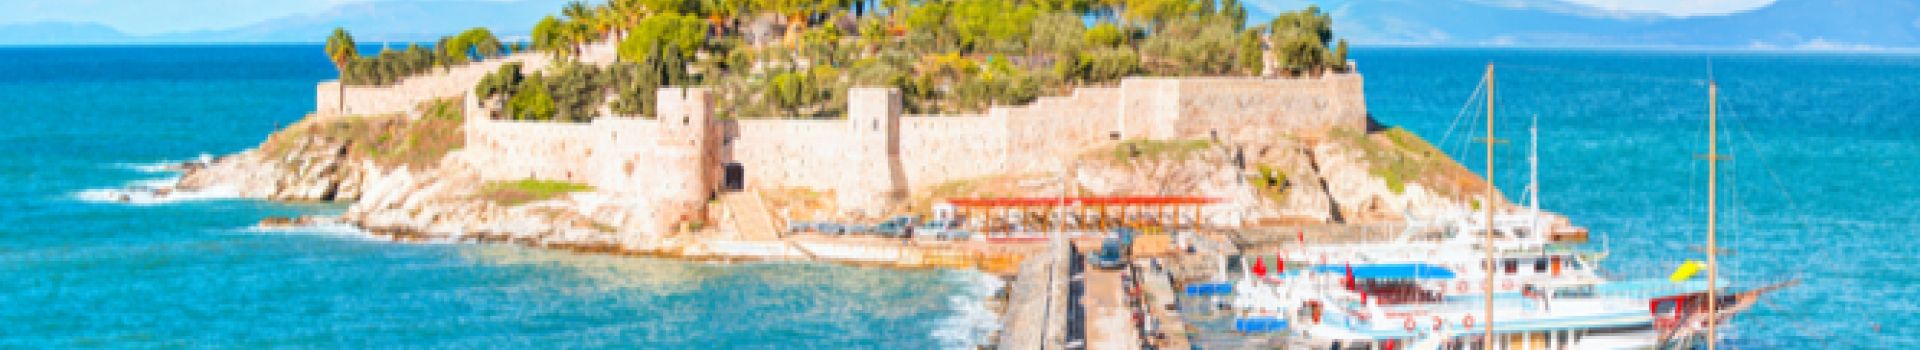 All inclusive family holidays to Kusadasi with Cassidy Travel